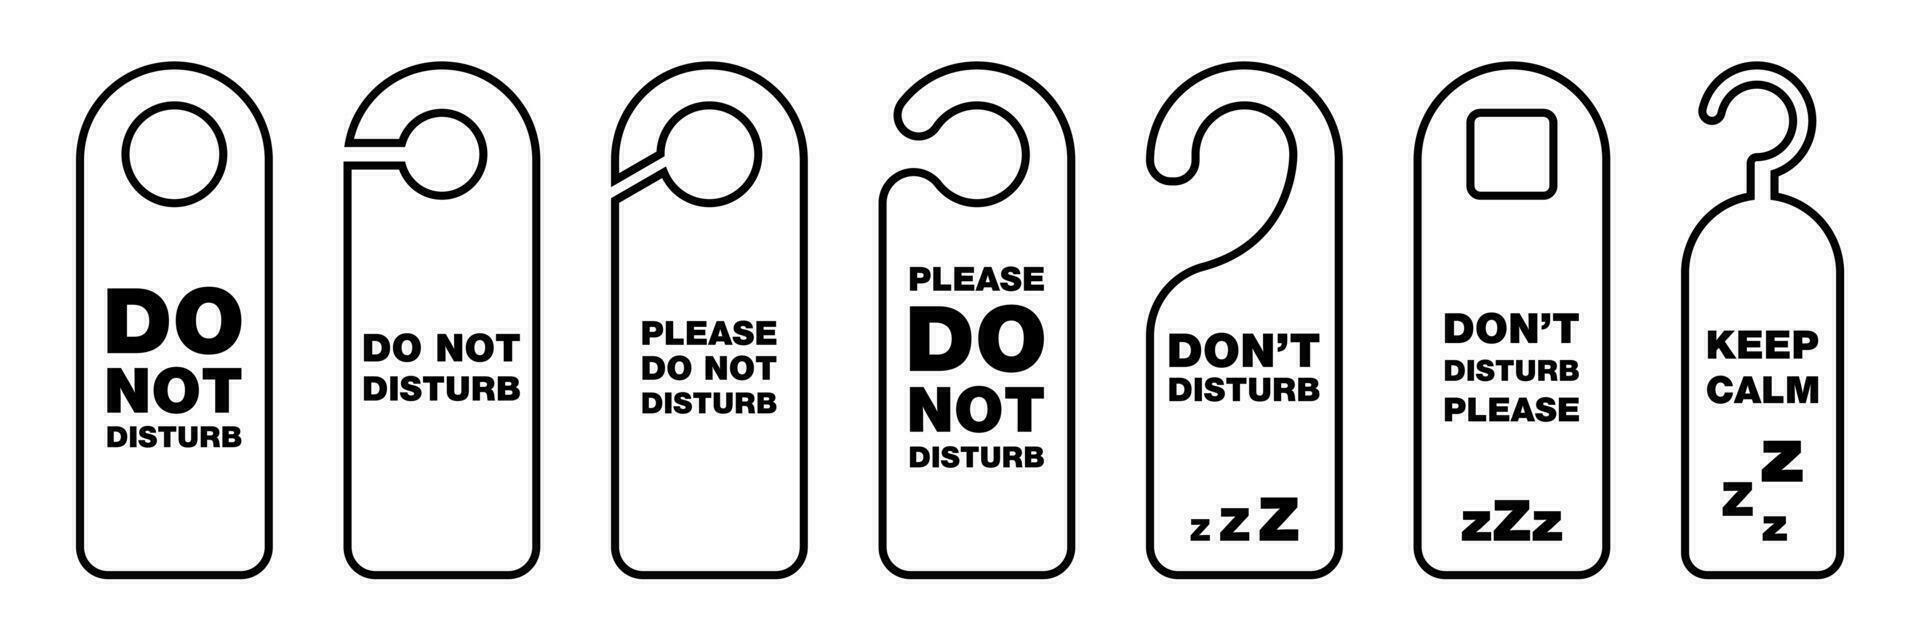 Do not disturb. Outline don't disturb label. Busy tag in hotel. Do not disturb hanging banner. Private message warn. Door tag in black. Busy symbol set. Vector illustration. EPS 10.